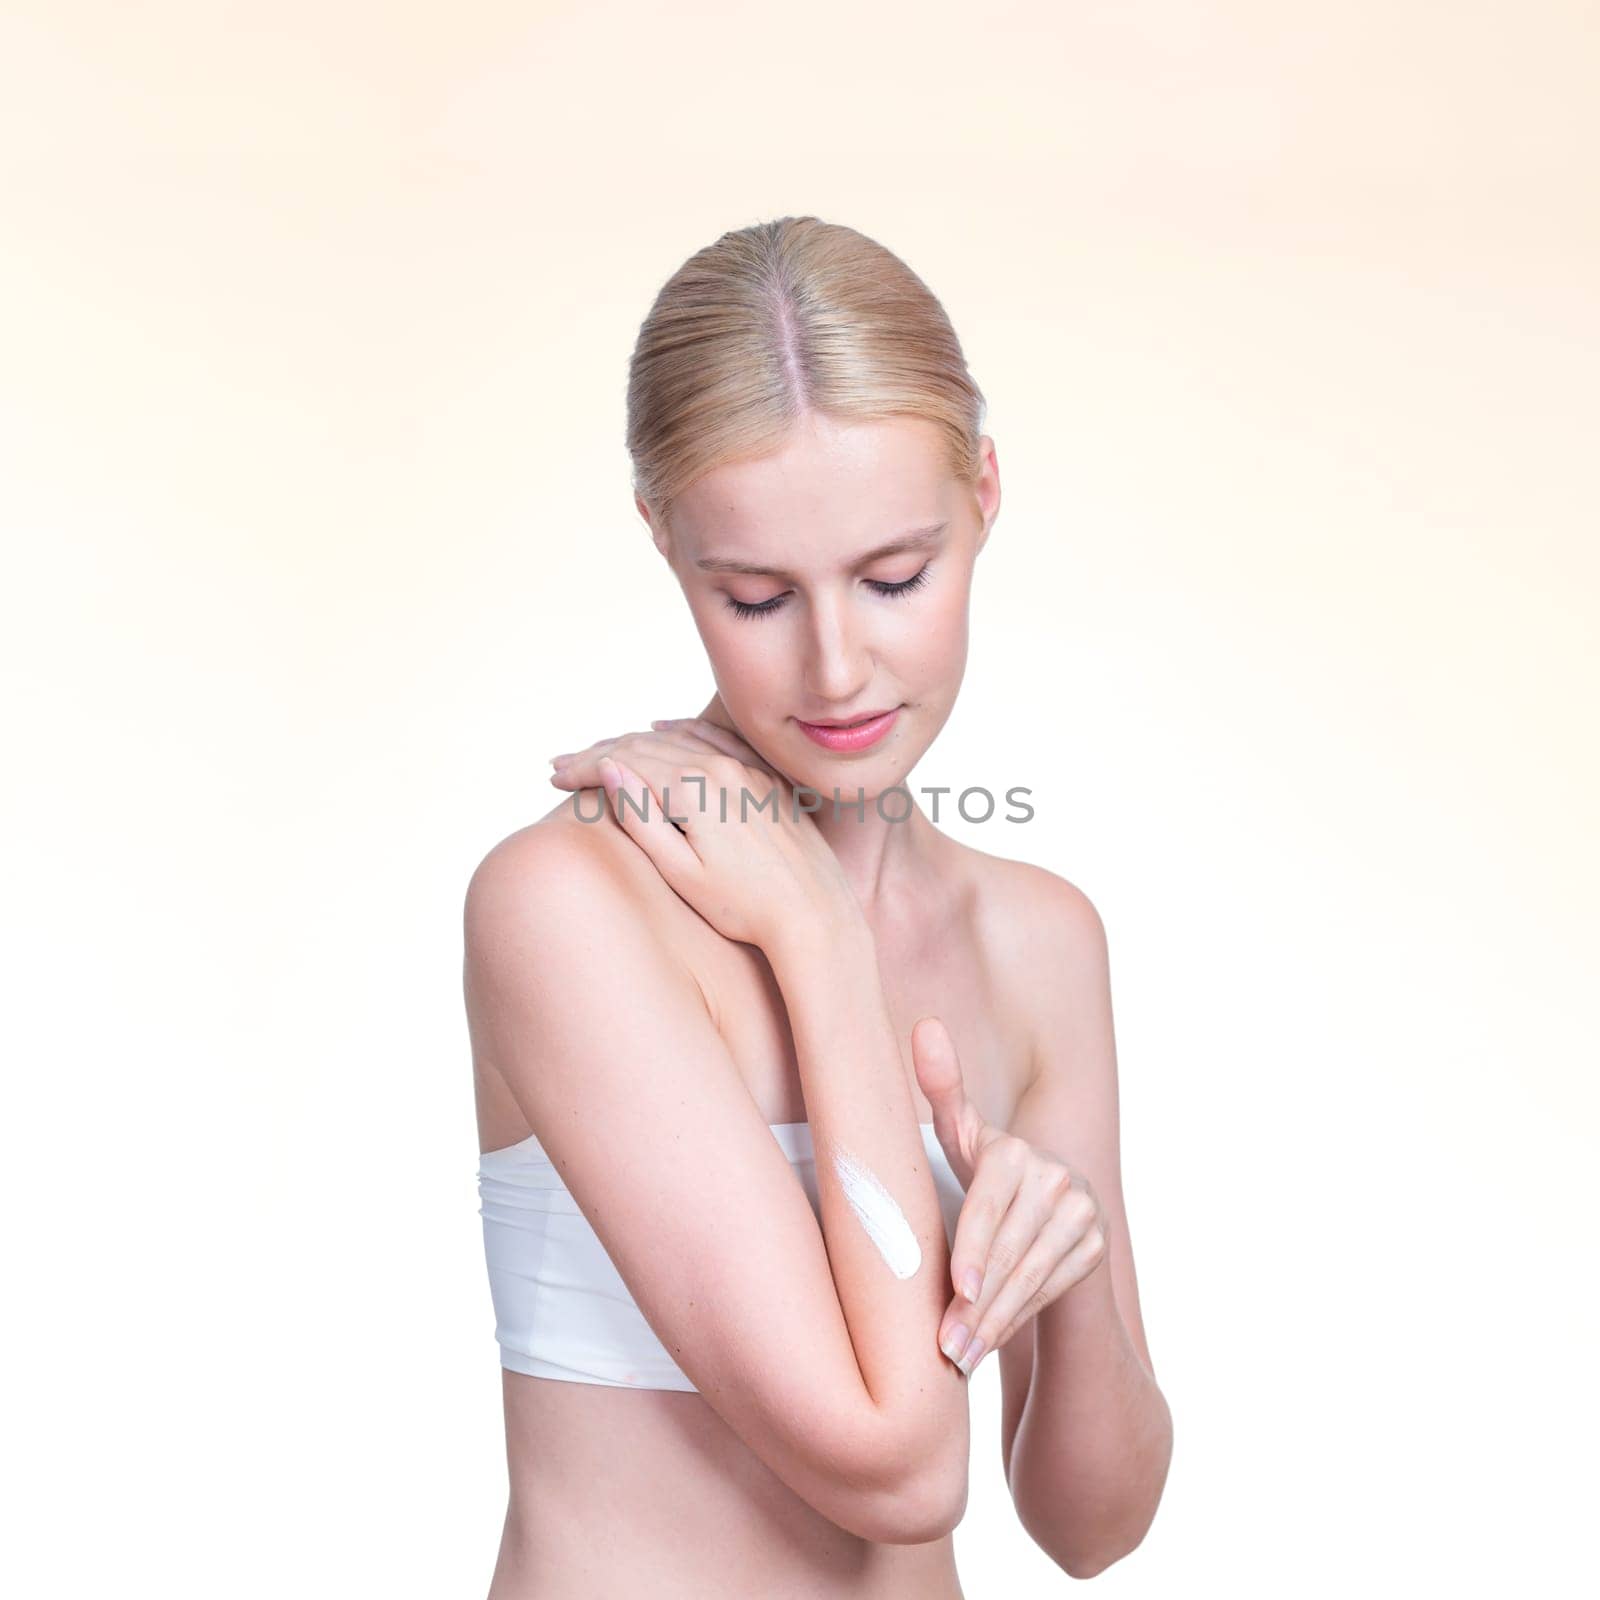 Personable beautiful woman putting skincare moisturizer cream on her arm looking in camera in isolated background as concept for beauty care treatment. Female model applying lotion on her body.